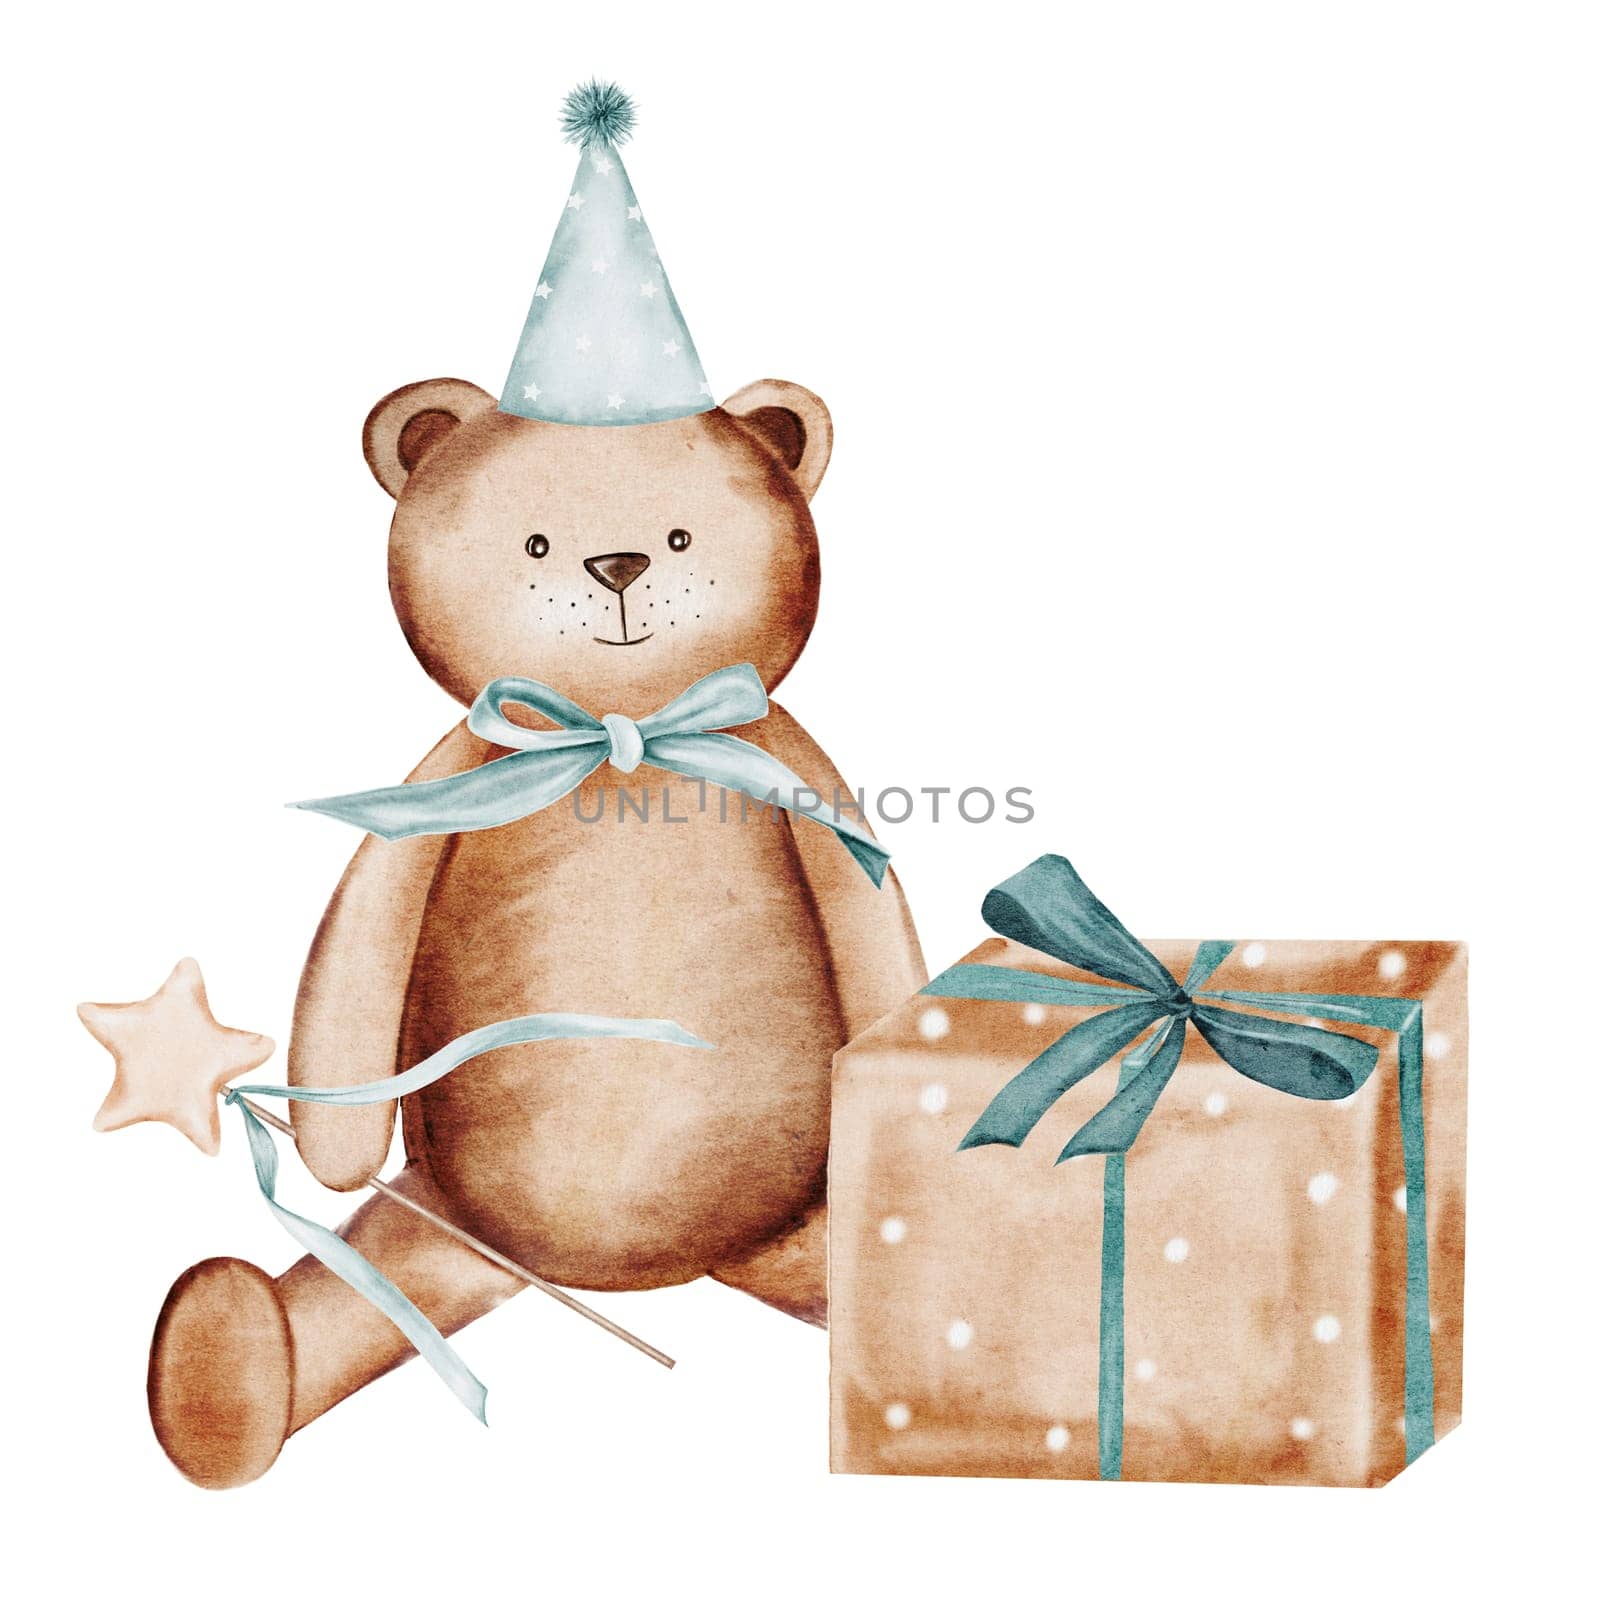 Baby birthday invitation watercolor. Cute hand drawn teddy bear with gift box, in a festive cap, with a bow and a wand. Clip art isolated on white background. Ideal for baby shower and birthday cards and invitations